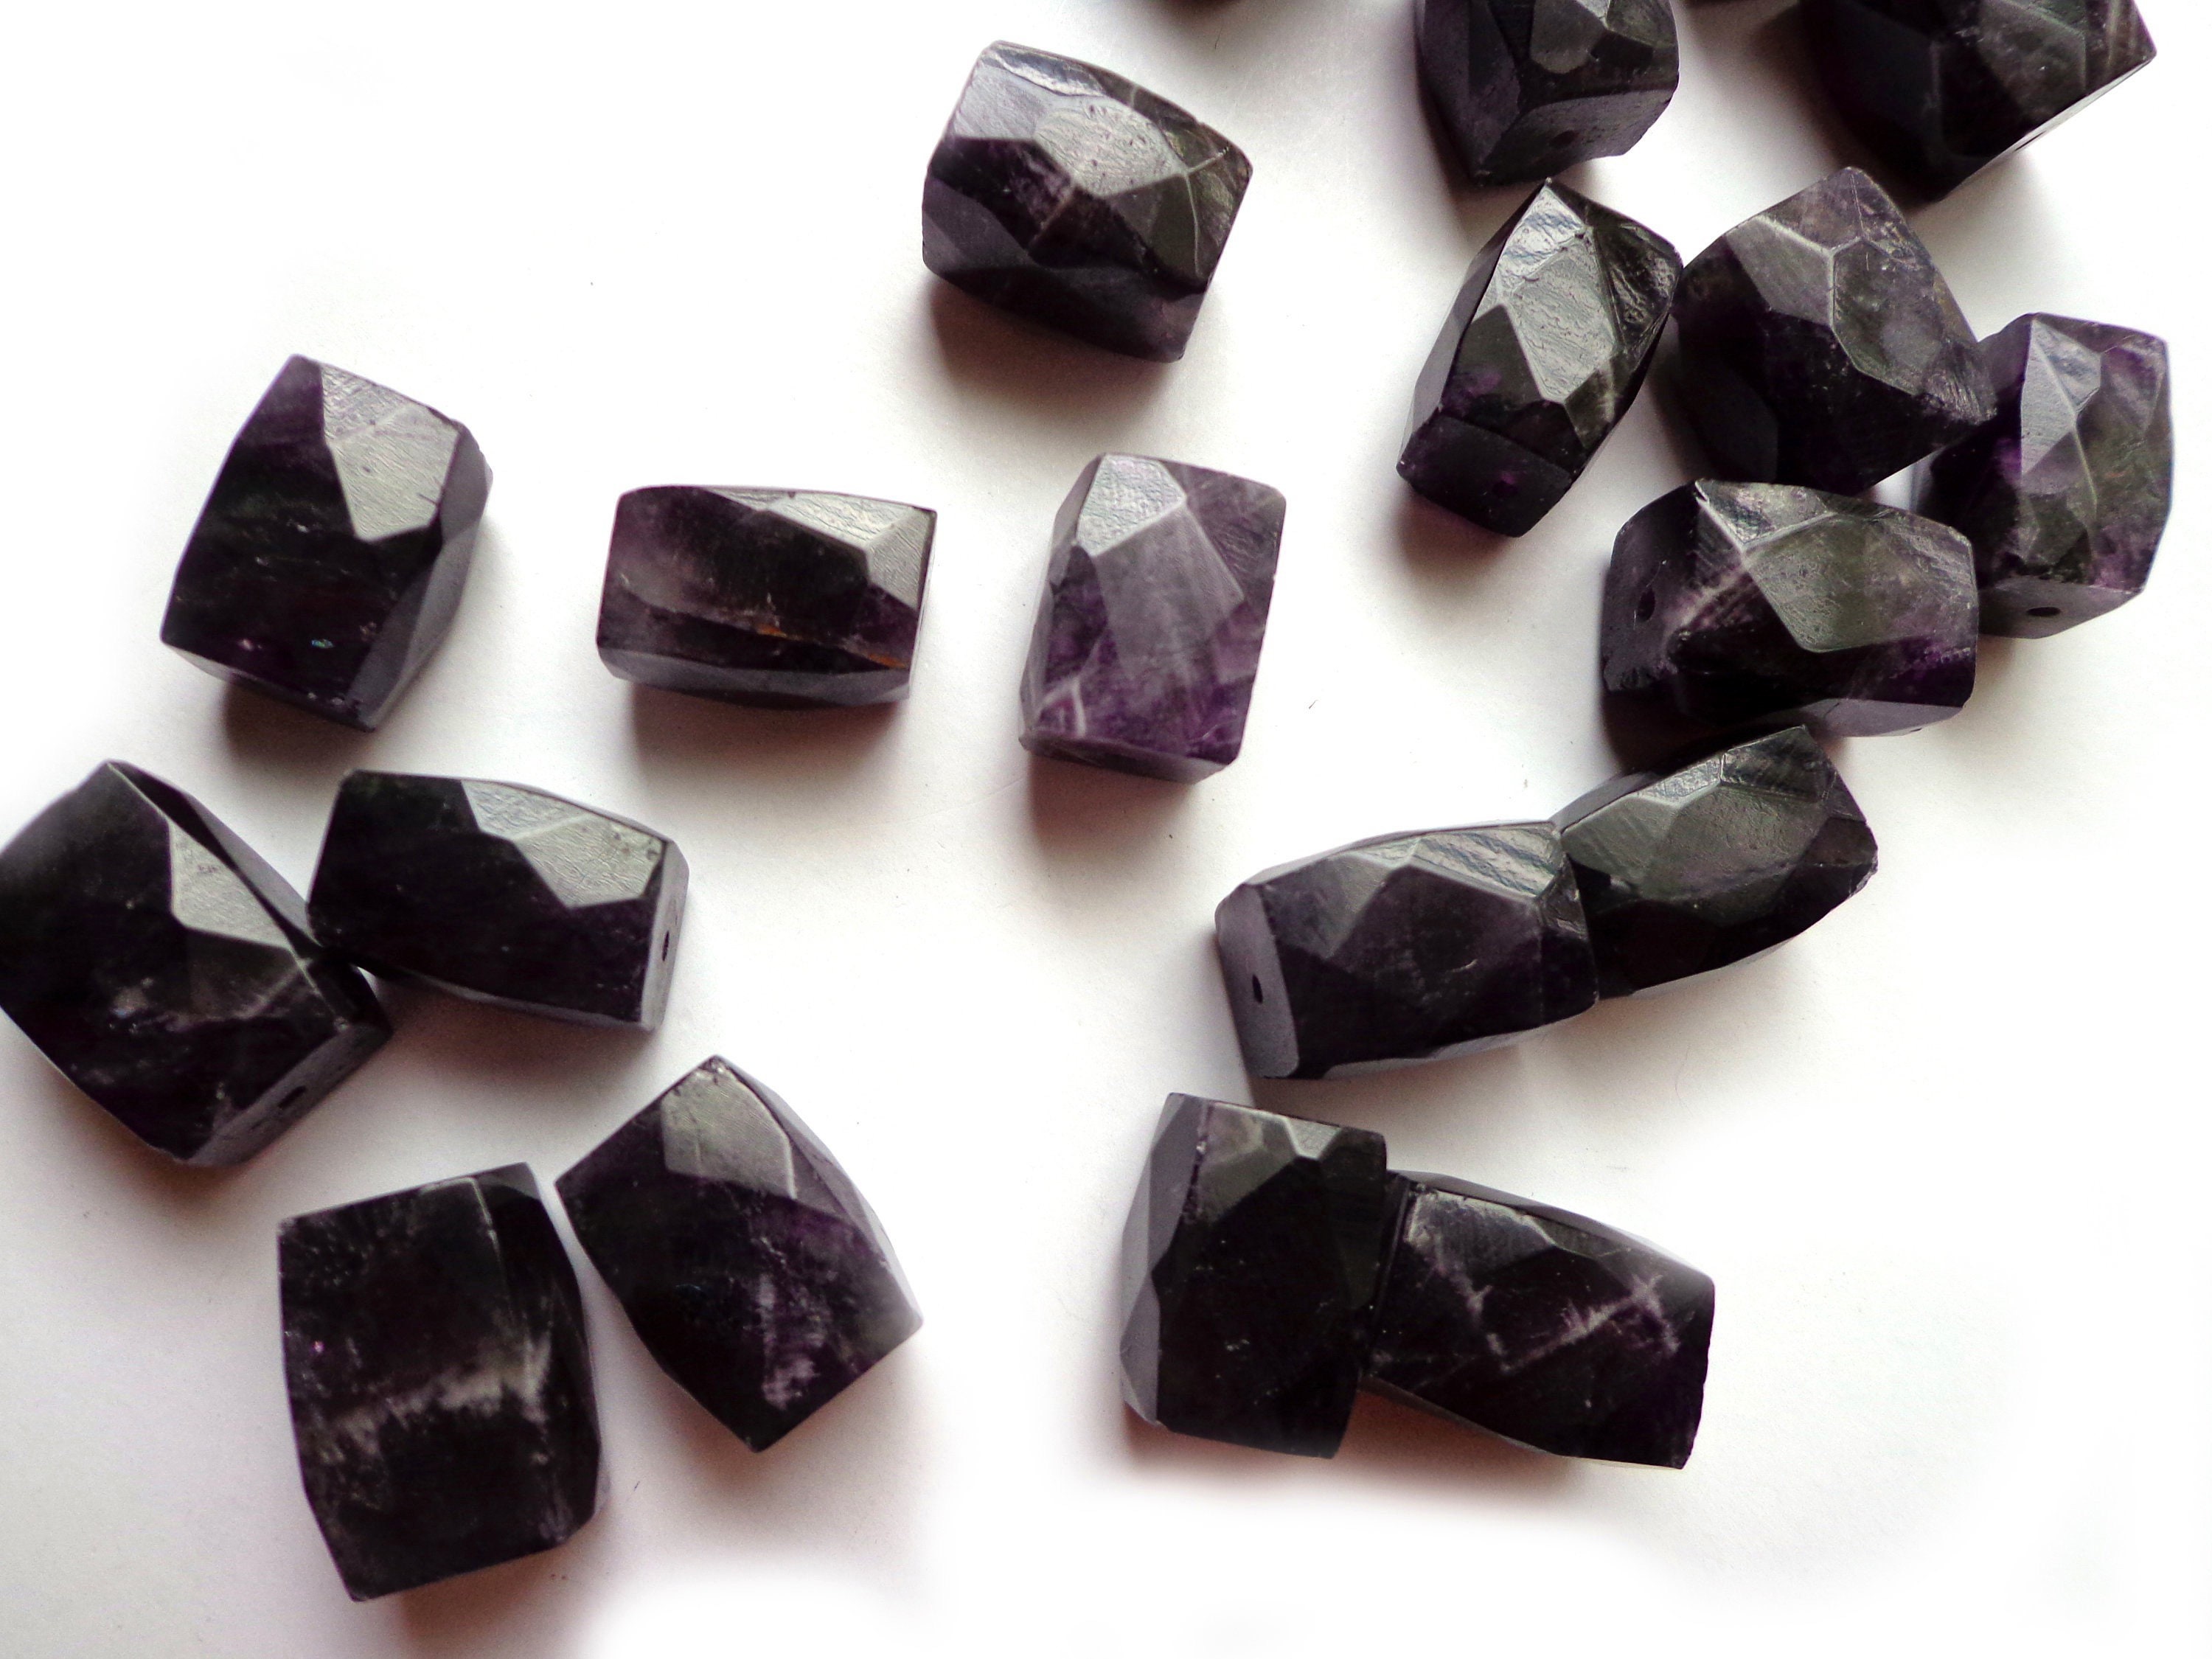 Great Quality Gemstone!! Gorgeous Deep Purple Natural Gemstone Amethyst Rectangle Faceted Bead Approximately 15x11 mm